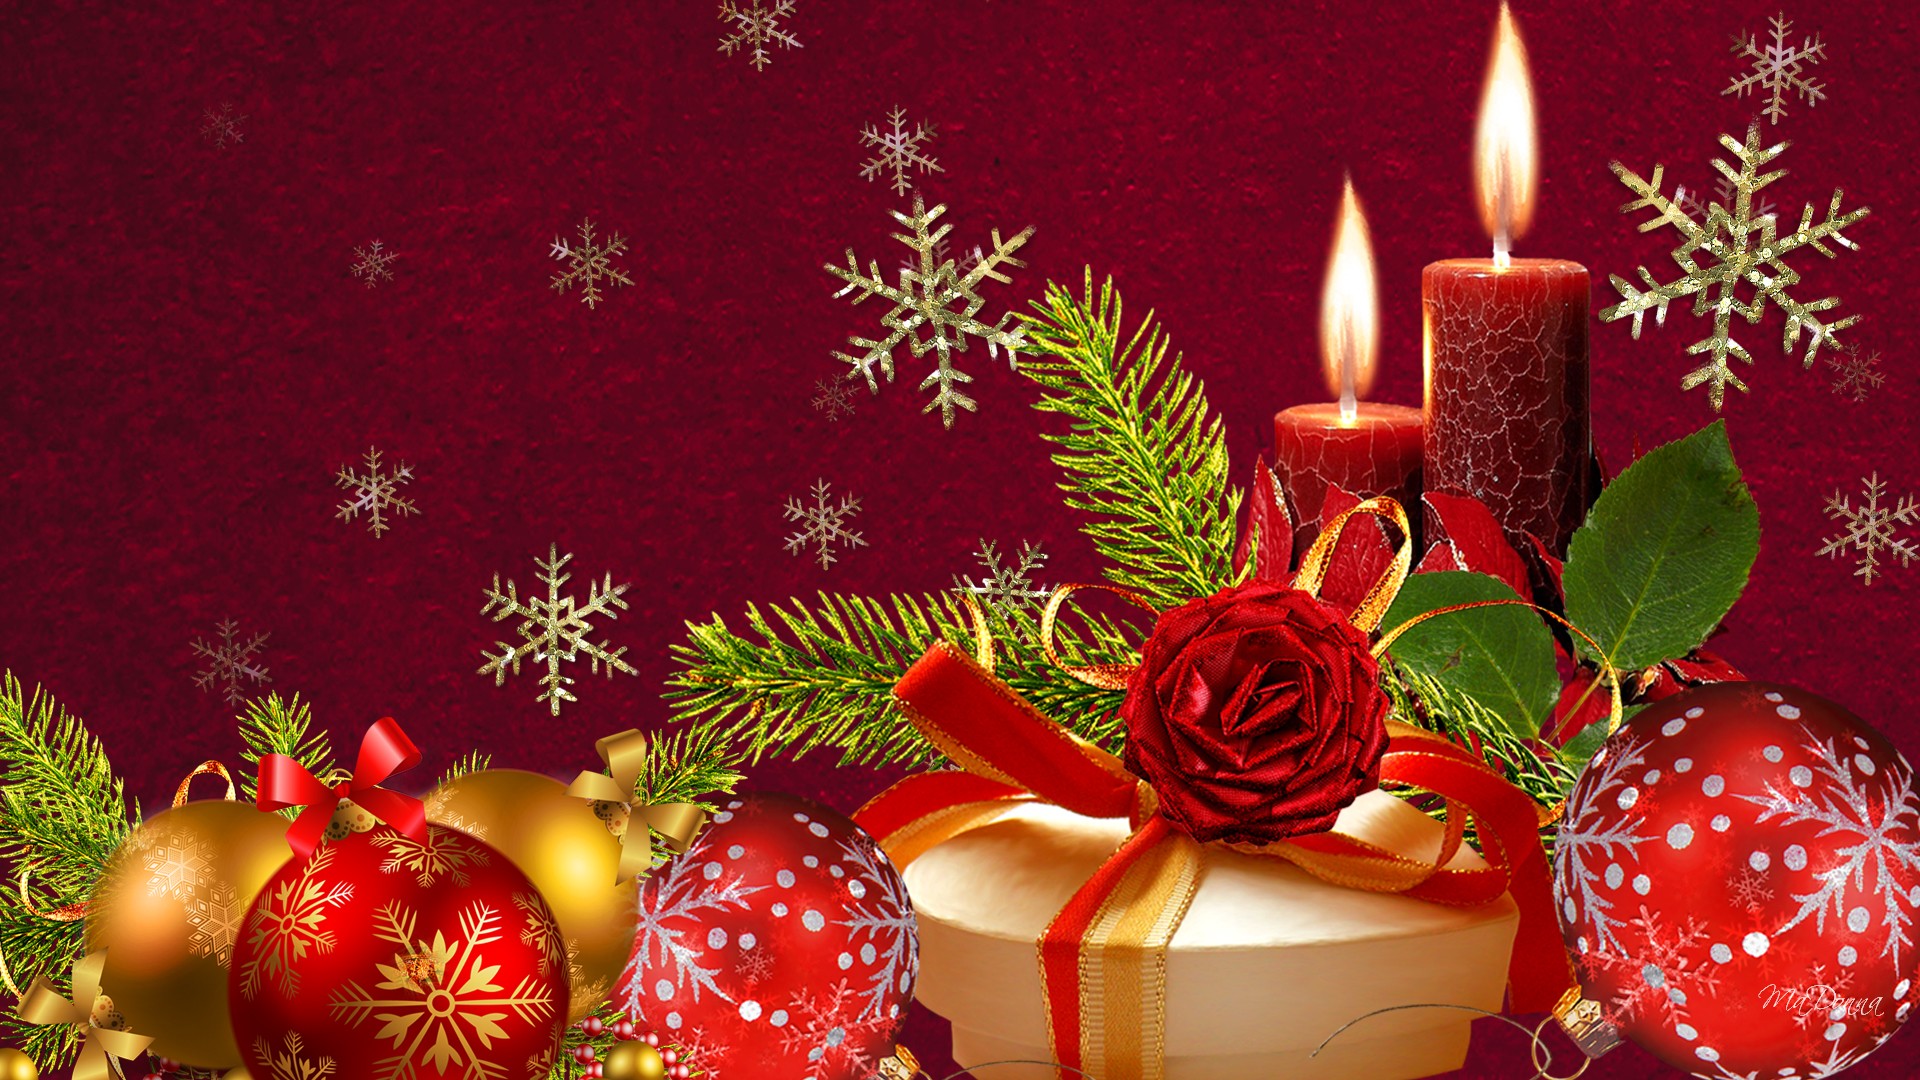 Christmas Background Wallpapers Wallpapers9